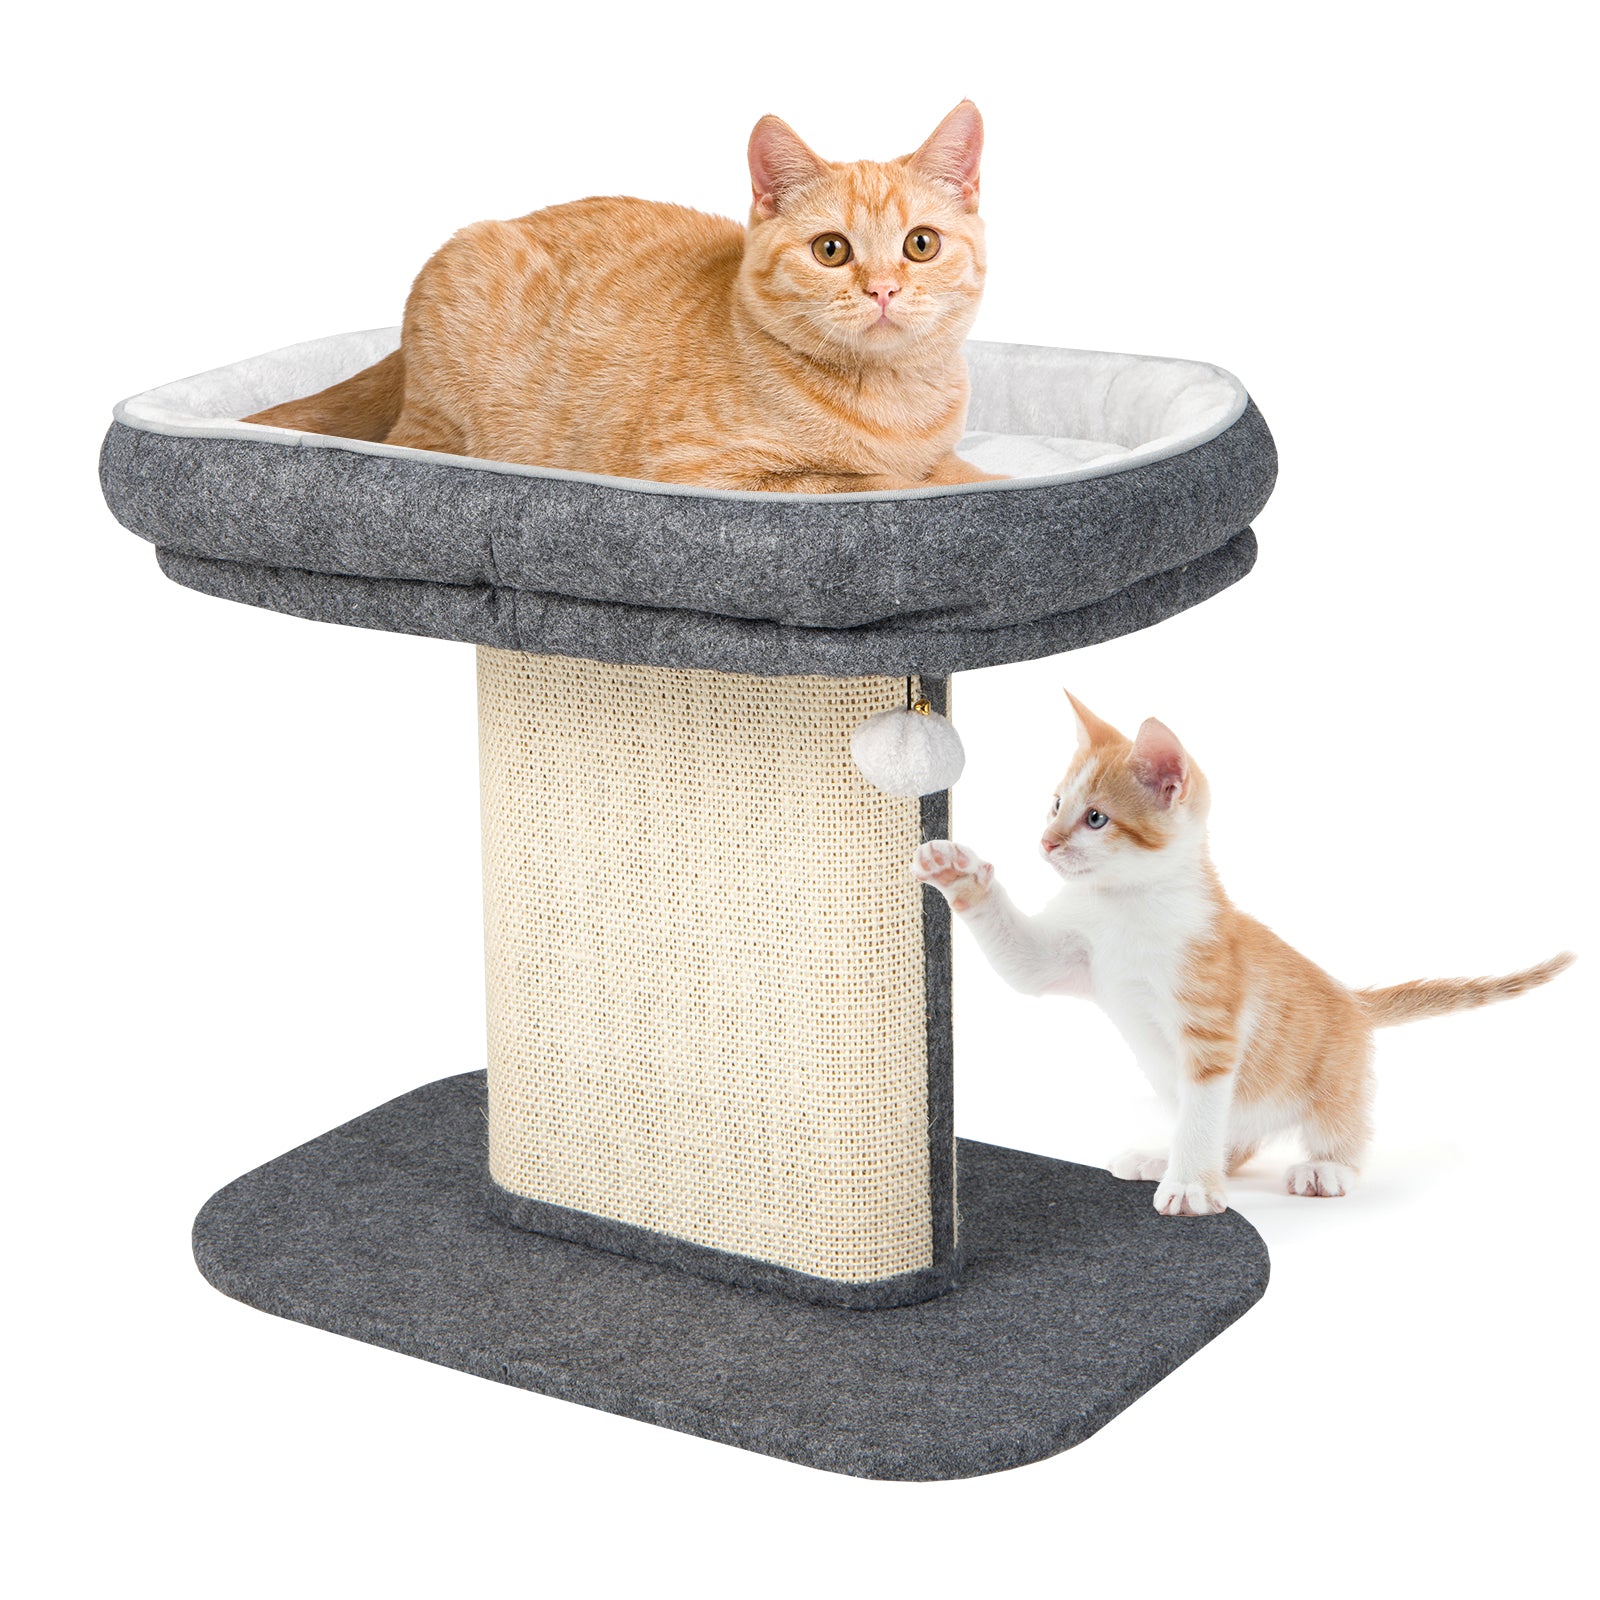 Cat Tree, Cat Tower, Cat Activity Centre, 2-Tier Cat Tree with Sleeping Perch Sisal Scratching Plate and Ball, Grey, Costway, 3